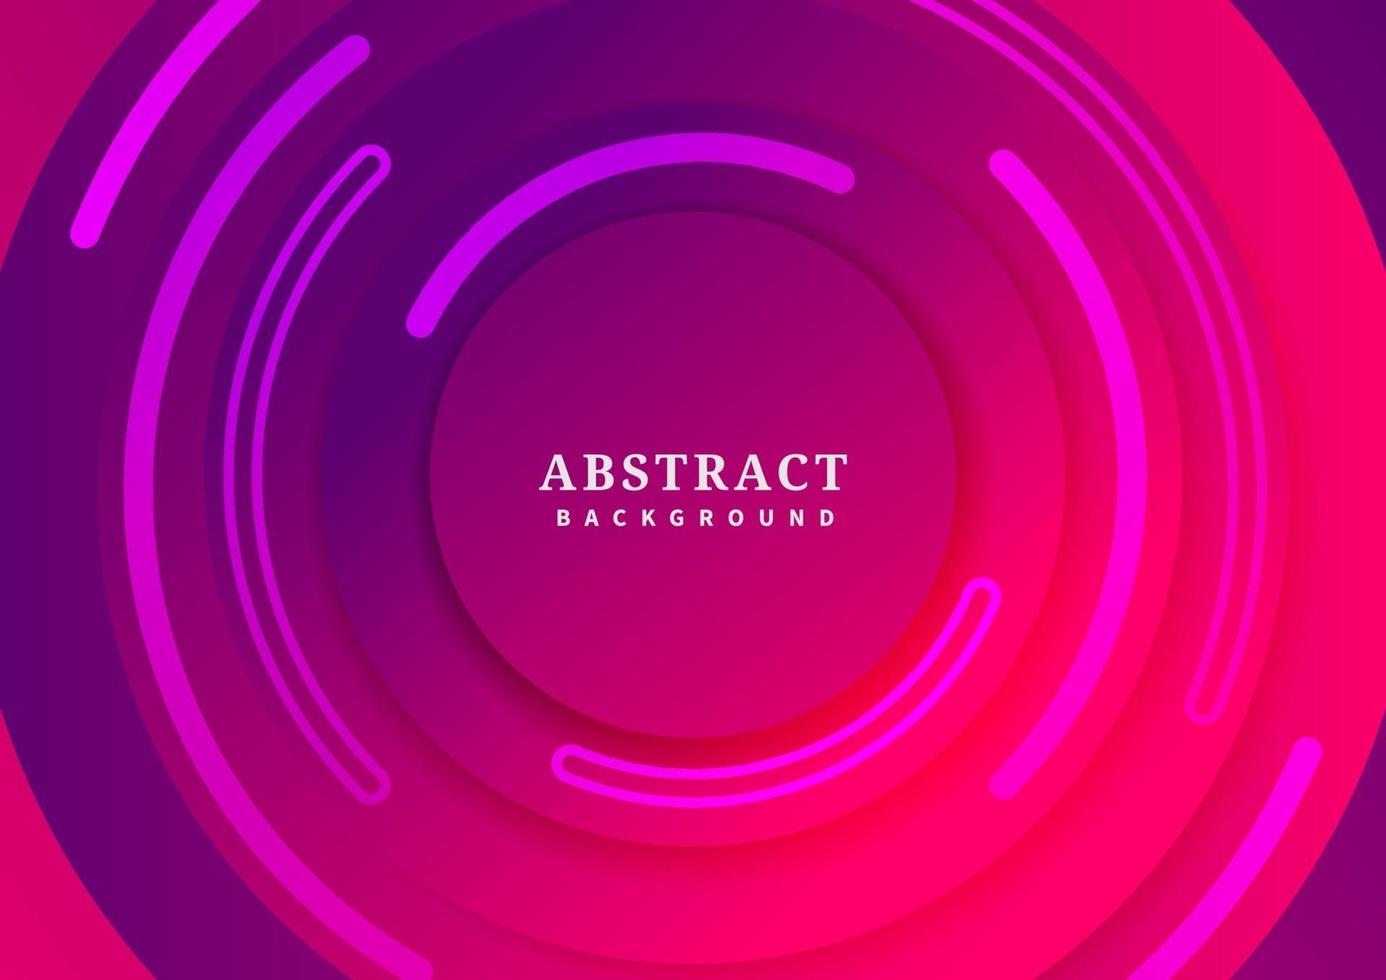 Abstract background red and purple circle border overlapping with shadow. Paper style. vector